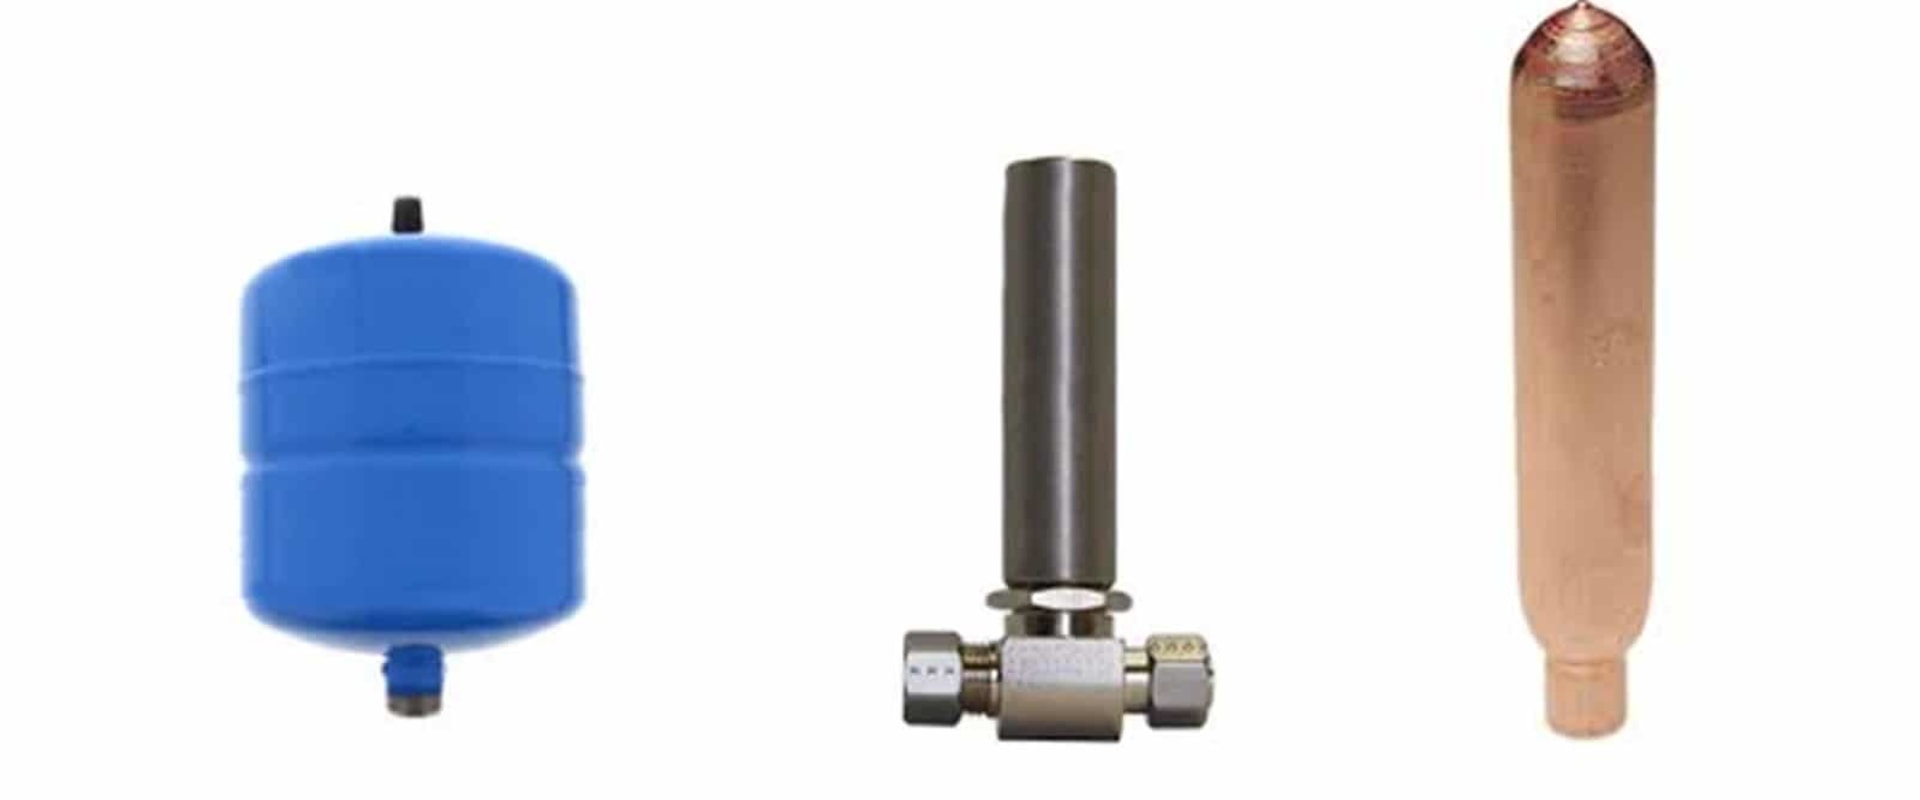 Is an air chamber the same as a water hammer arrestor?